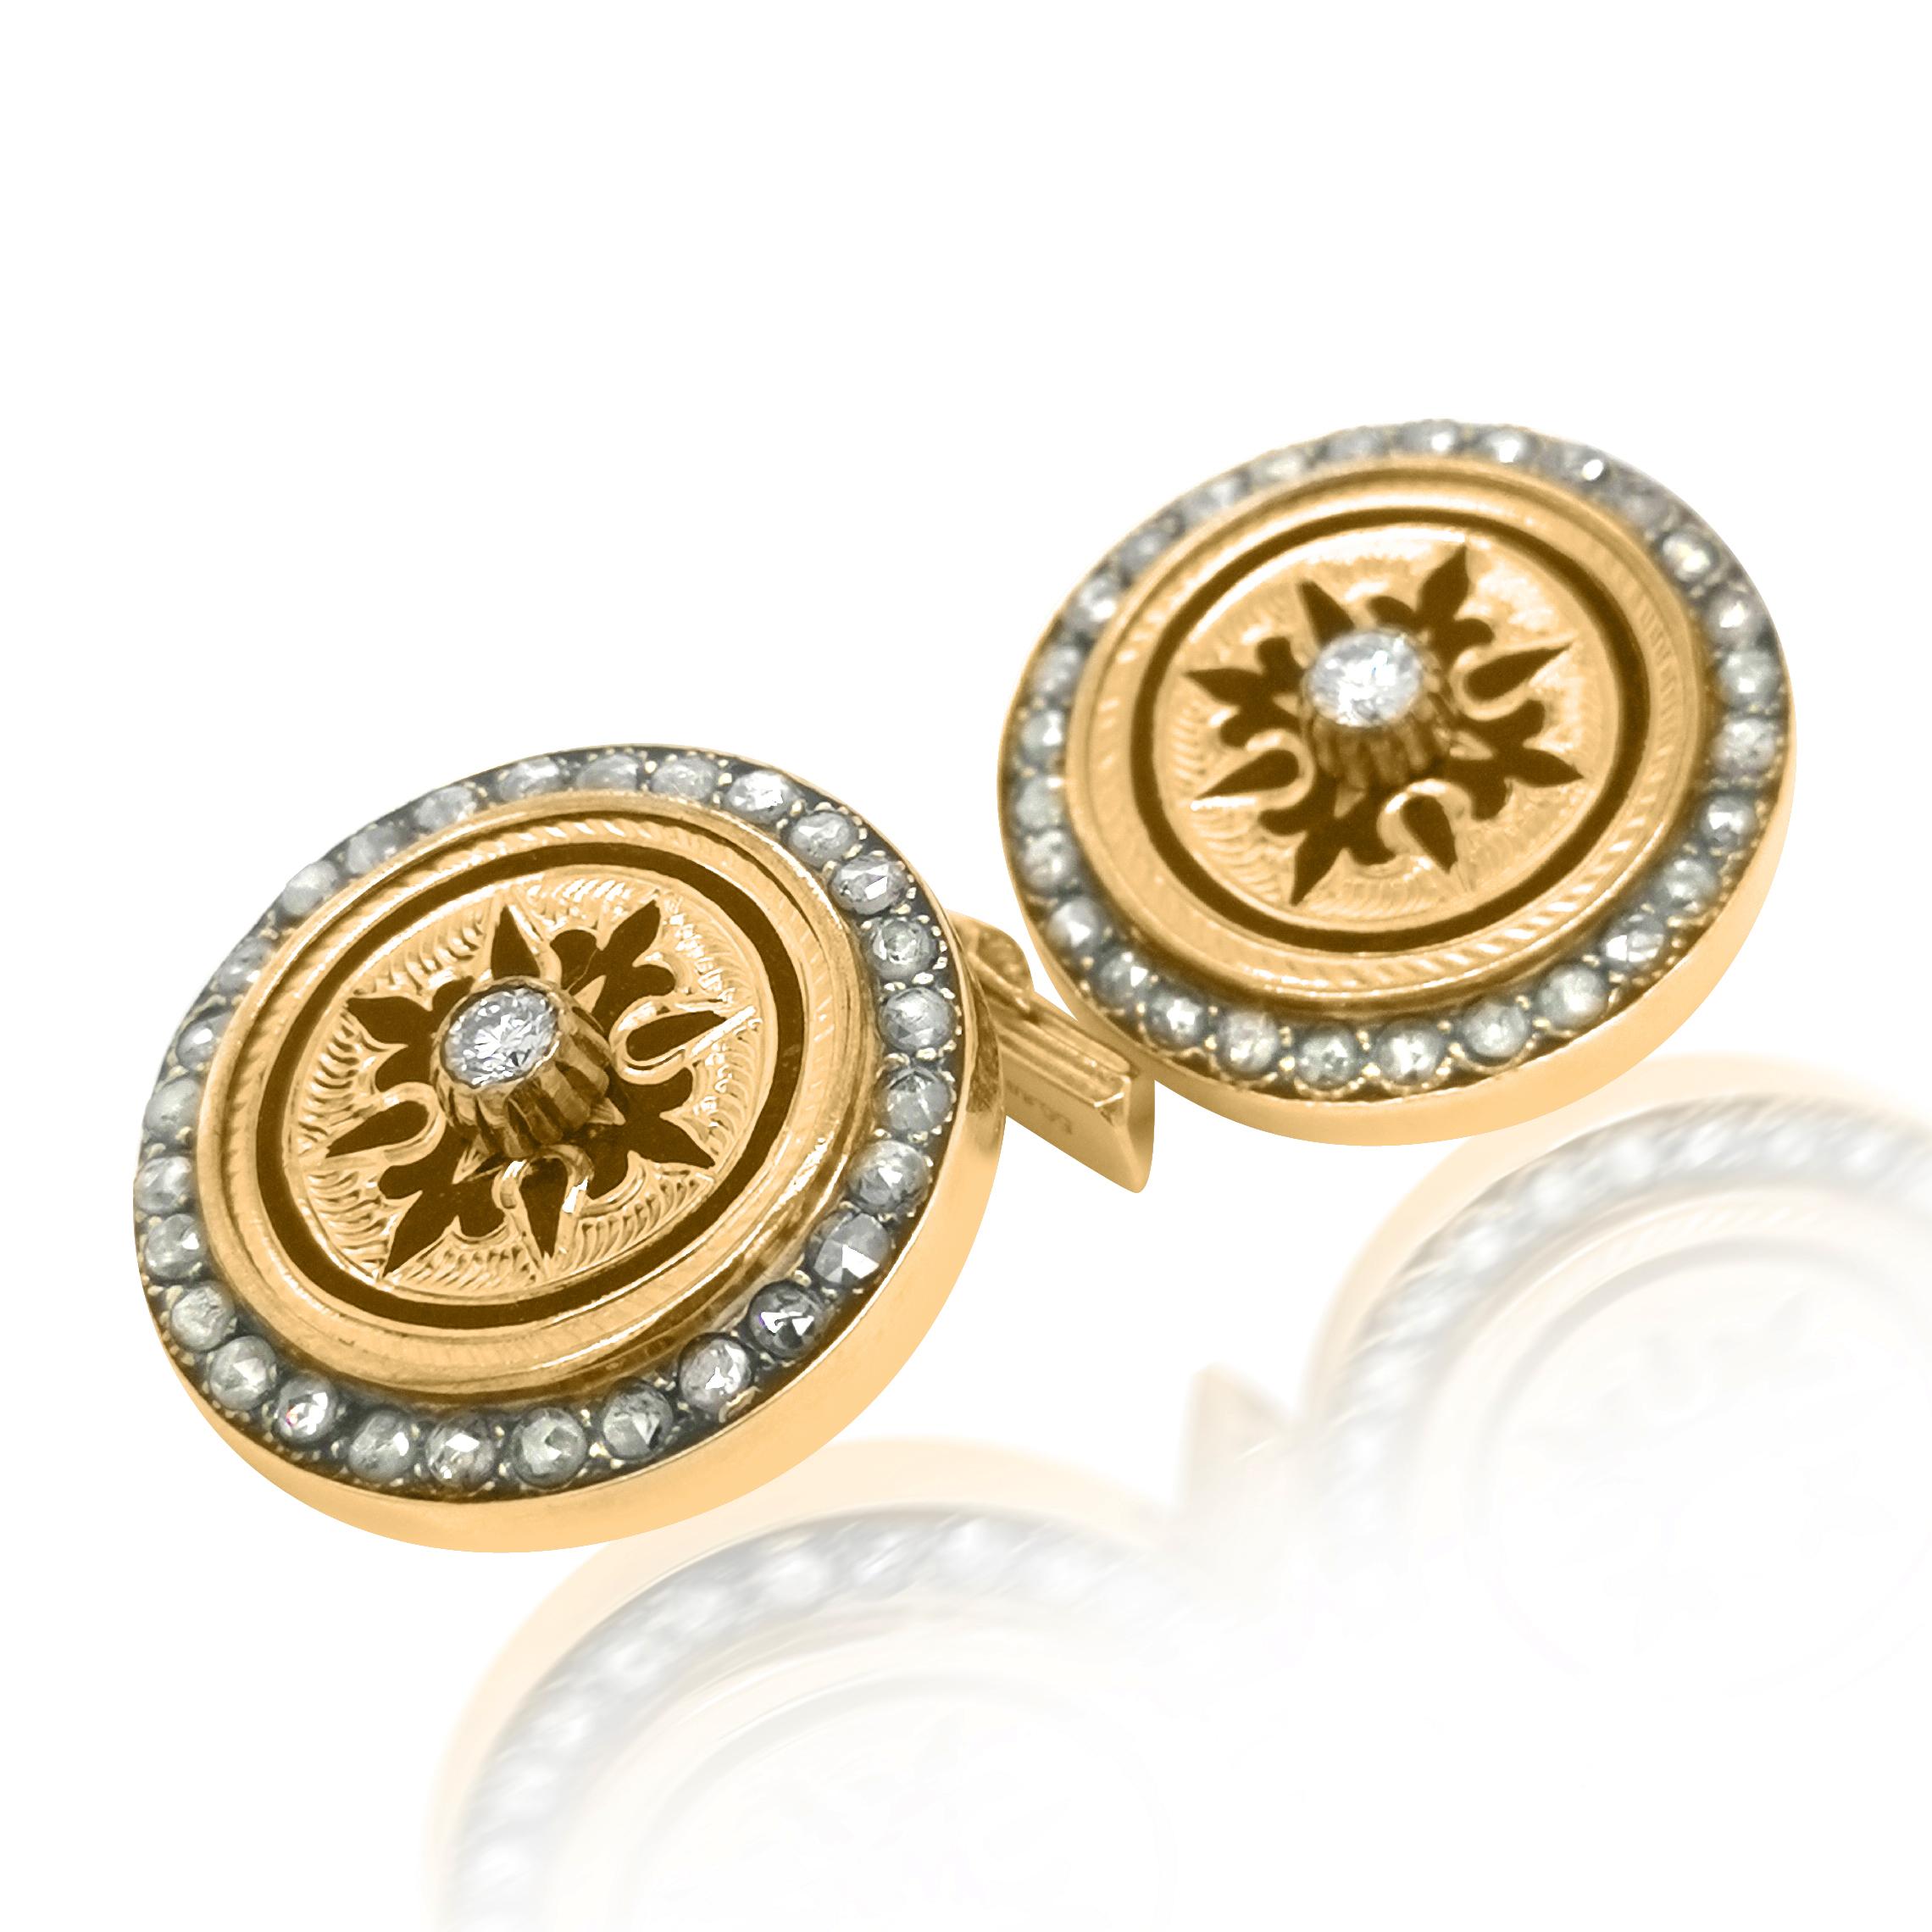 This pair of authentic Farberge diamond cufflinks is rendered in 14K yellow gold, centred with floral motif black enamel, enhanced with diamonds weighing approx. 1.2 carats in total. The cufflinks are 32mm in diameter, weighing 24.17 grams. Comes